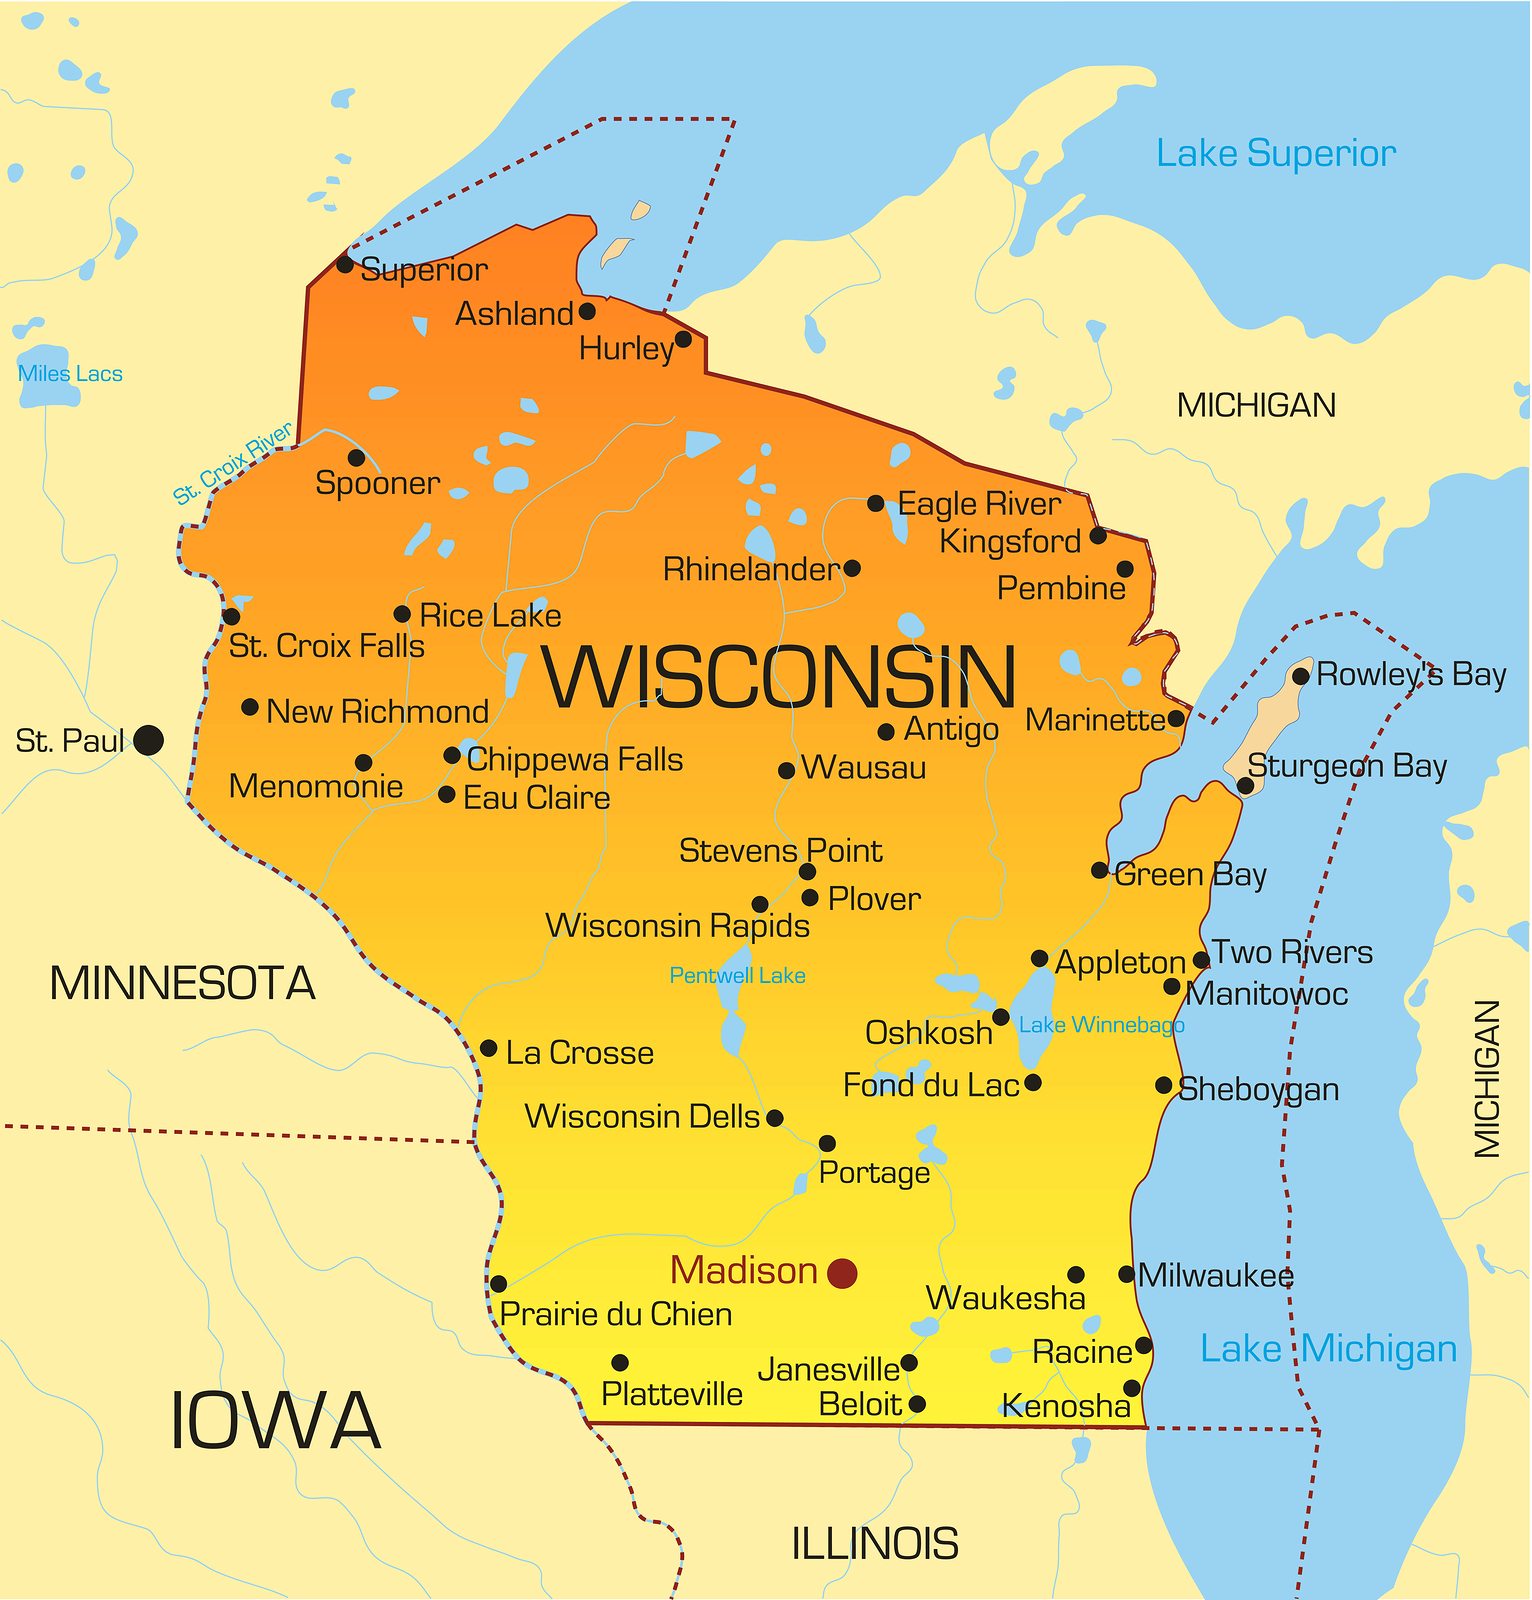 Wisconsin LPN Requirements and Training Programs